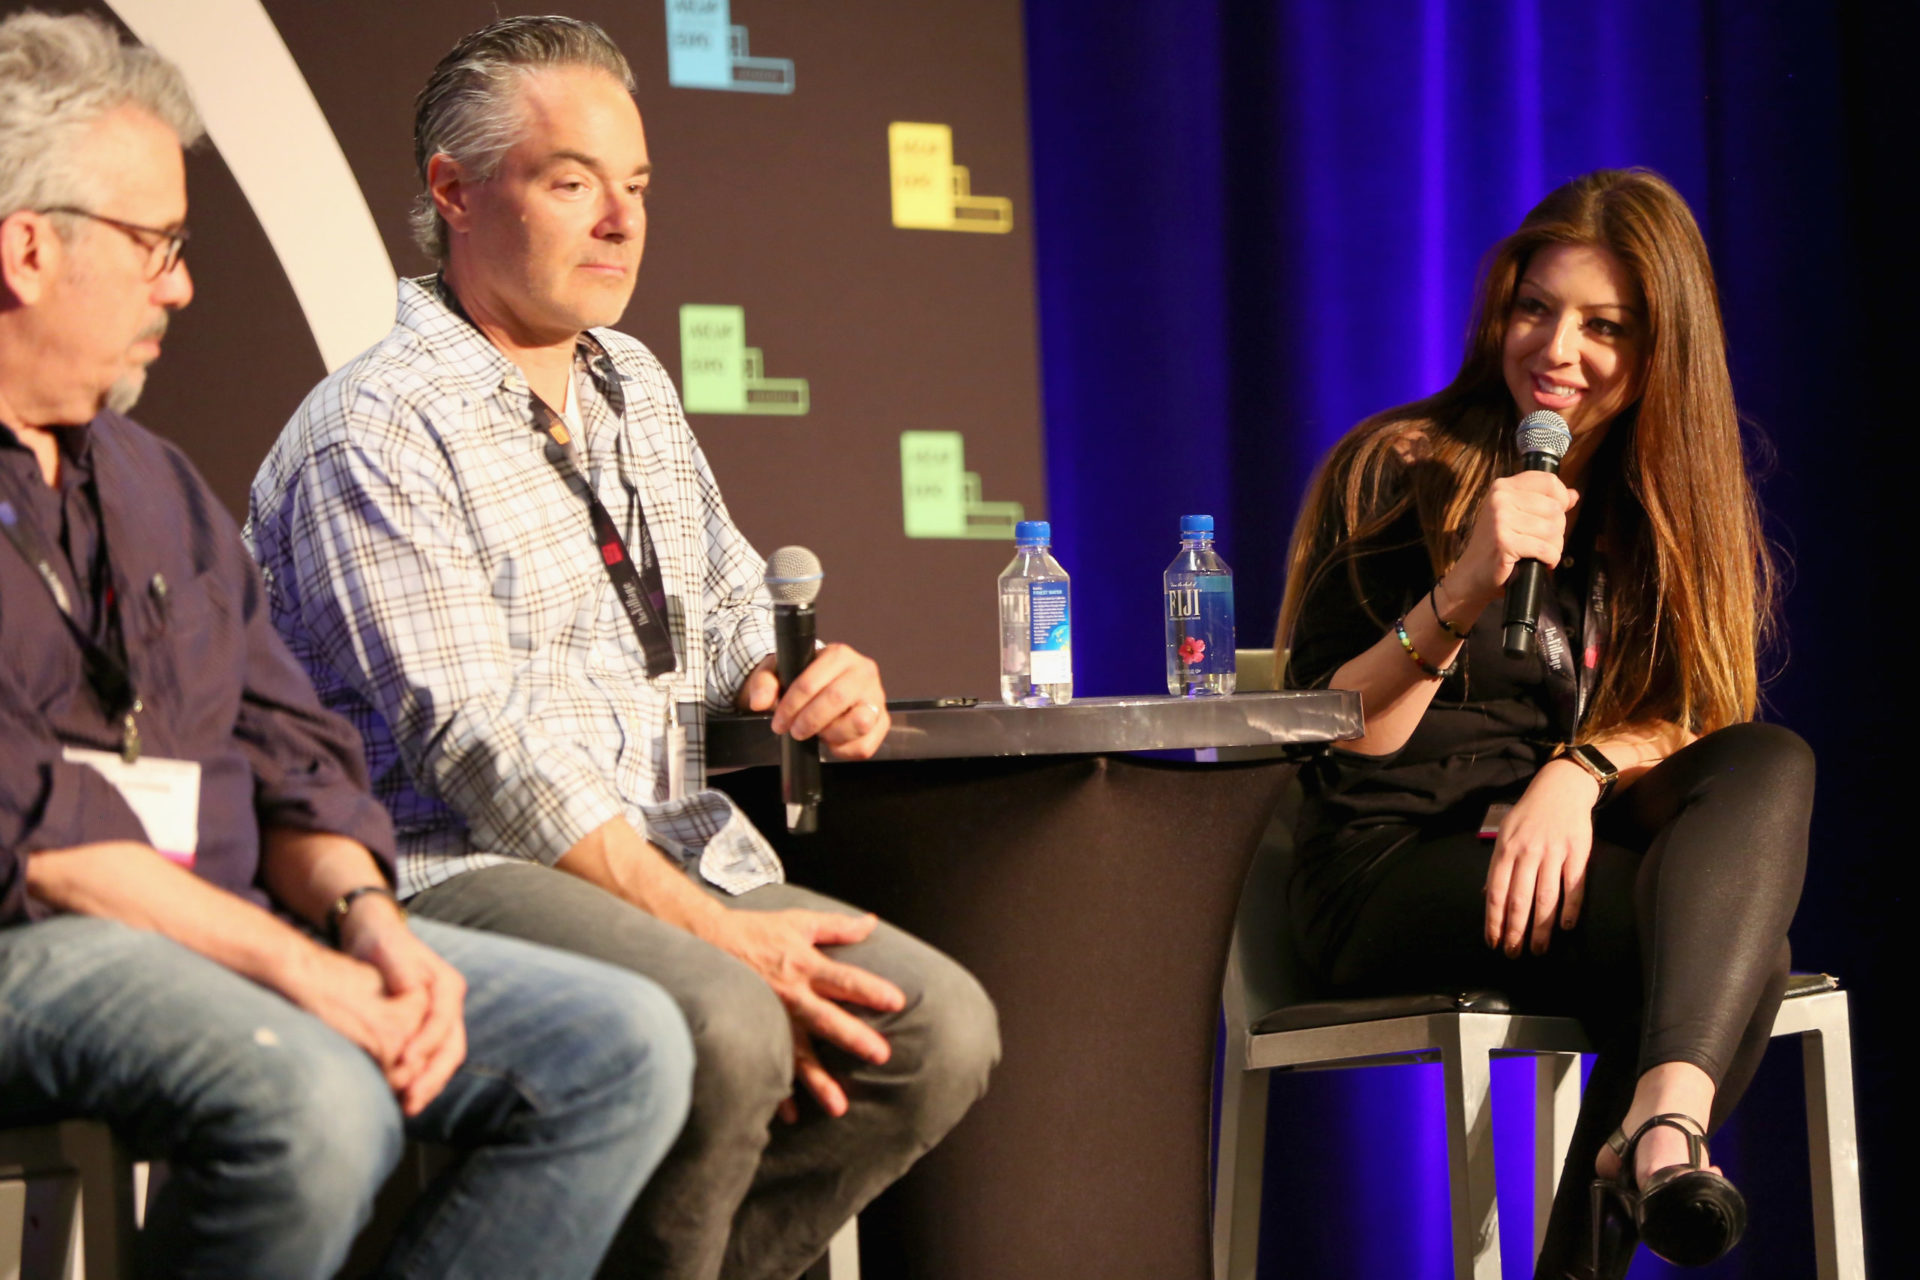 Pinar Toprak, Marco Beltram, and Garry Schyman at the 2018 ASCAP Experience conference.